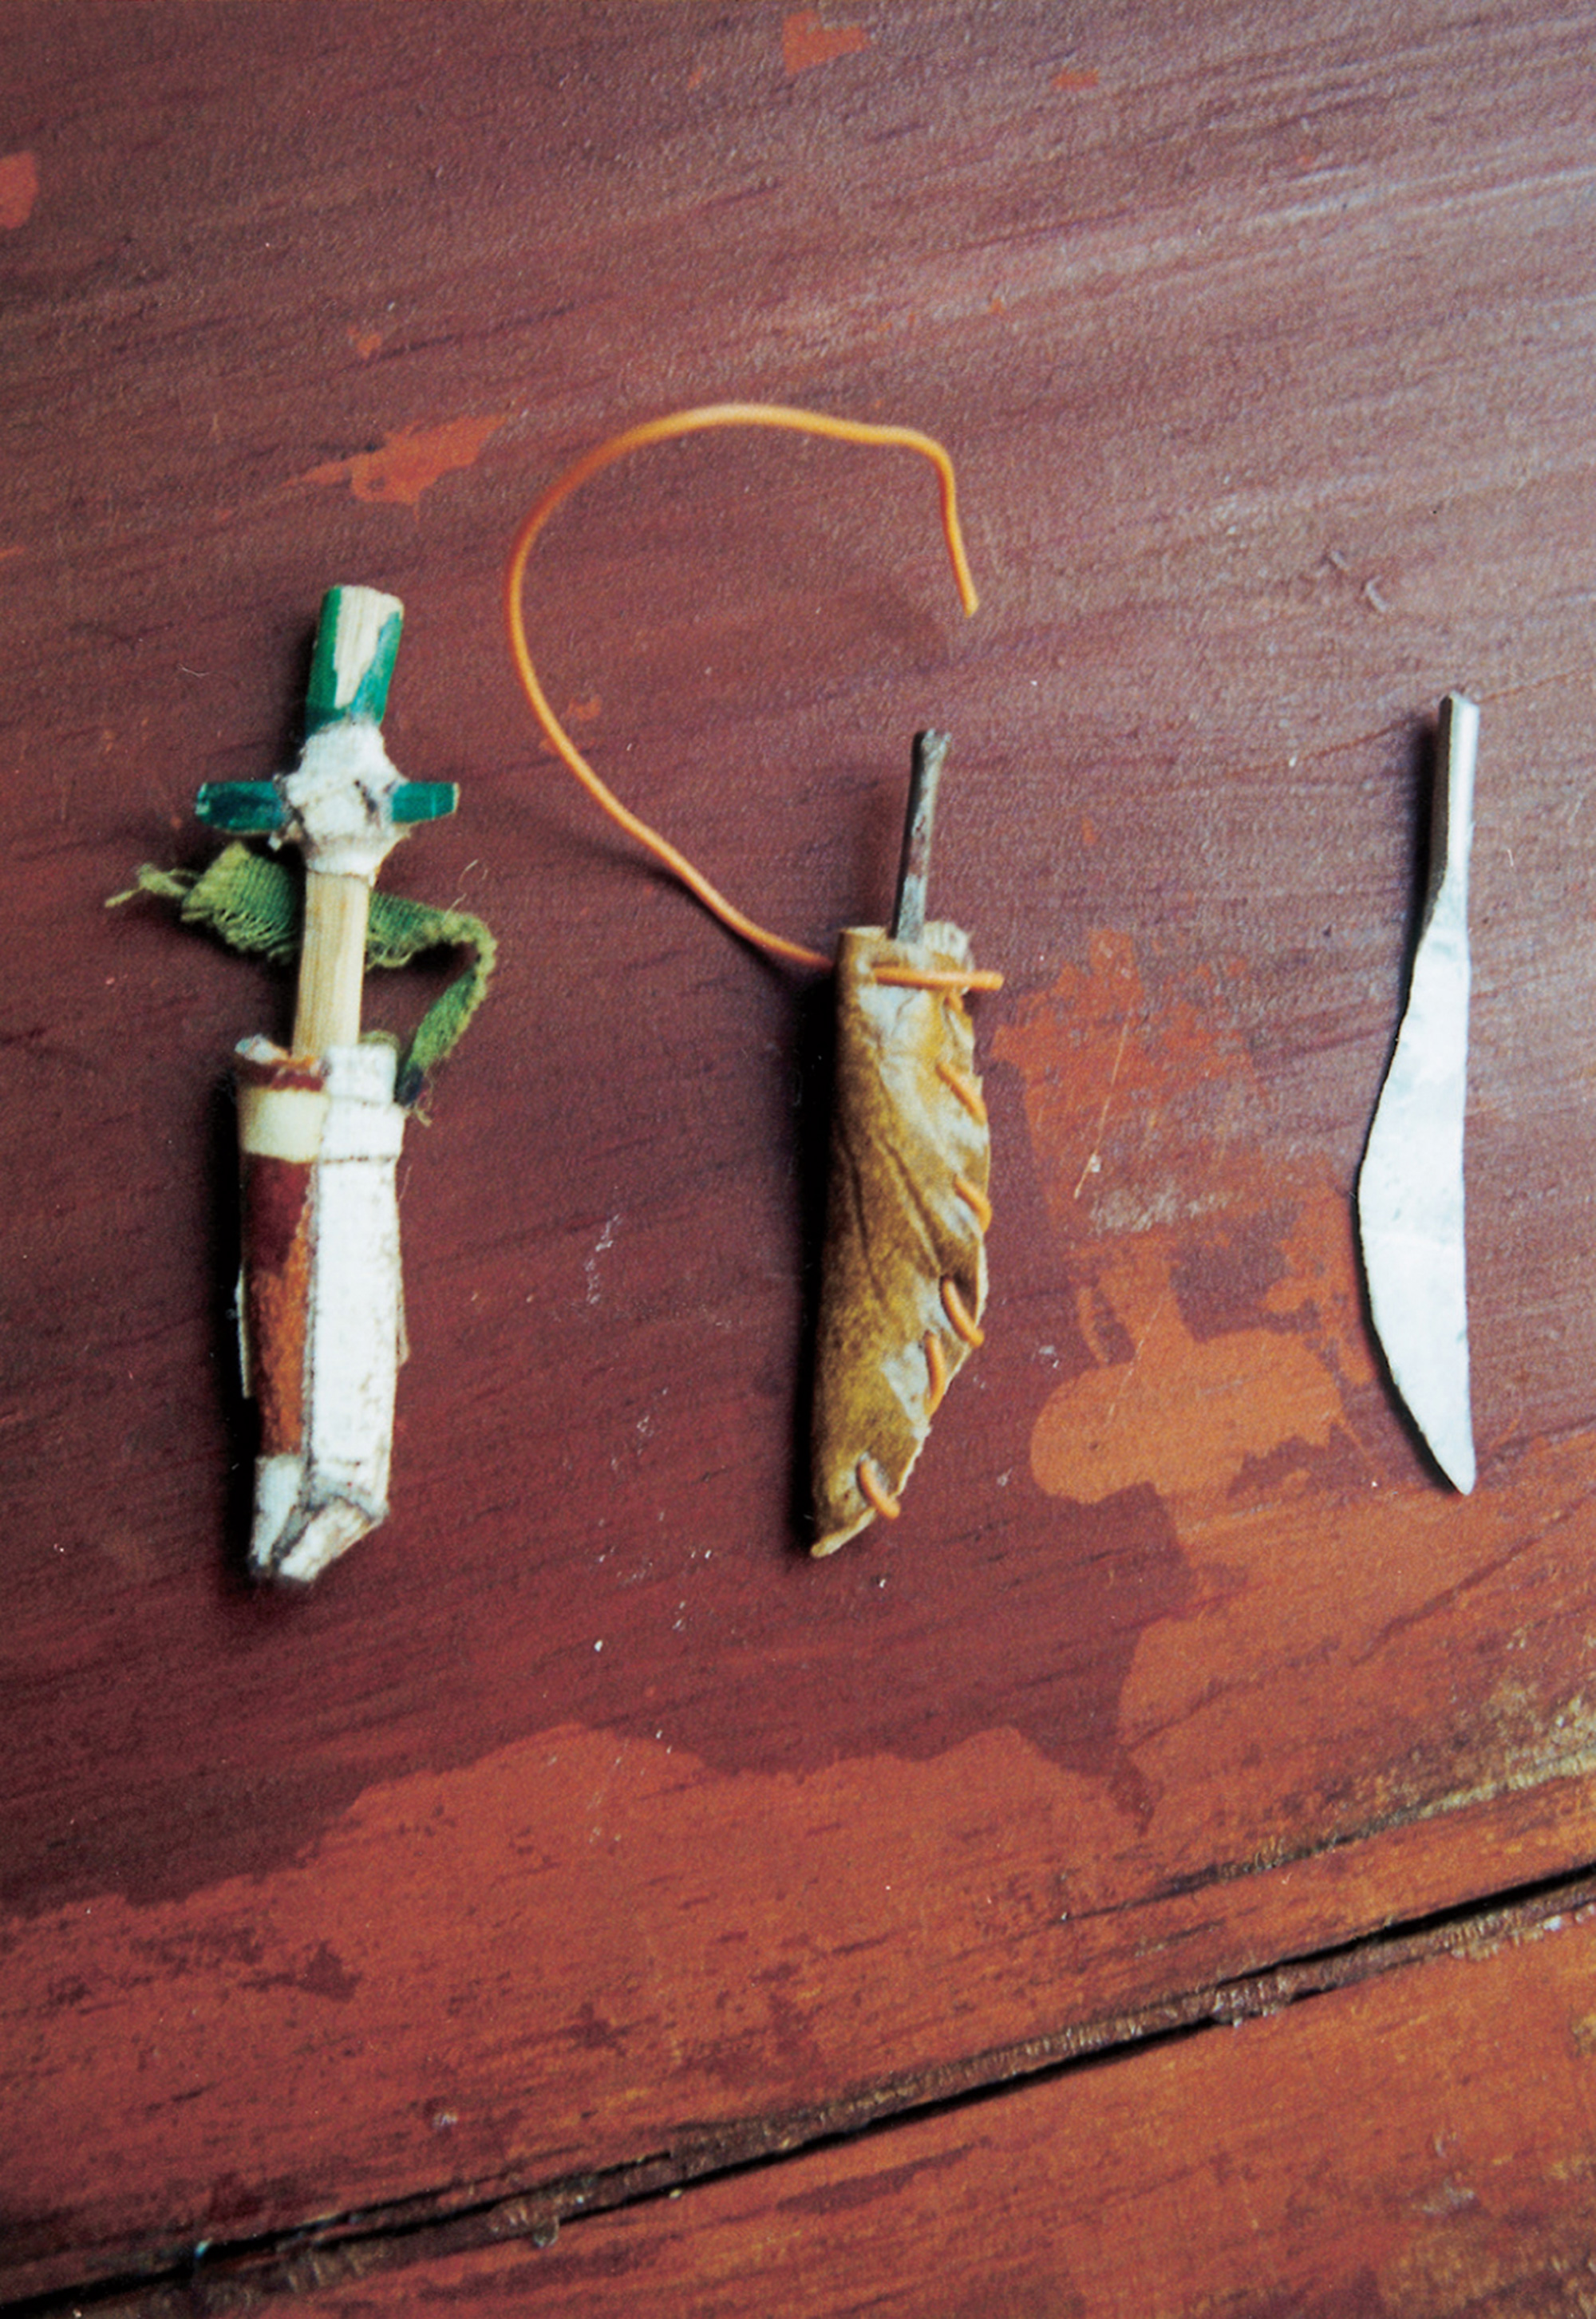 A photograph depicting three tiny knives. The caption reads: Lot of three daggers. 1. Steel dagger made of a round-headed nail, half of which has been hammered flat to make a straight, narrow blade; the sheath is faux leather, folded and stitched up one side with telephone wire, the end of which is left loose to serve as a strap.
2. Aluminum dagger made of a length of wire hammered flat.
3. Bamboo dagger, whittled flat and tapered toward the tip. The grip is colored green on one side; a short hand-guard is affixed to the blade with white medical cloth tape. The blade fits snugly inside its sheath, which is real leather folded and joined with more cloth tape. A thin strip of fraying green cloth is taped to the top of the sheath; this once formed a loop for hanging, but is torn close to the sheath on one end.
Daggers, not all of them as finely crafted as these, were de rigueur for the heroes and heroines (above all the spunky Aina) of the Doll Games’ “Pirate” and “Outlaw” scenarios.
 
 
 	
A photograph depicting three tiny knives. The caption reads: Lot of three daggers. 1. Steel dagger made of a round-headed nail, half of which has been hammered flat to make a straight, narrow blade; the sheath is faux leather, folded and stitched up one side with telephone wire, the end of which is left loose to serve as a strap.
2. Aluminum dagger made of a length of wire hammered flat.
3. Bamboo dagger, whittled flat and tapered toward the tip. The grip is colored green on one side; a short hand-guard is affixed to the blade with white medical cloth tape. The blade fits snugly inside its sheath, which is real leather folded and joined with more cloth tape. A thin strip of fraying green cloth is taped to the top of the sheath; this once formed a loop for hanging, but is torn close to the sheath on one end.
Daggers, not all of them as finely crafted as these, were de rigueur for the heroes and heroines (above all the spunky Aina) of the Doll Games’ “Pirate” and “Outlaw” scenarios.
Turn on screen reader support
To enable screen reader support, press ⌘+Option+Z To learn about keyboard shortcuts, press ⌘slash

